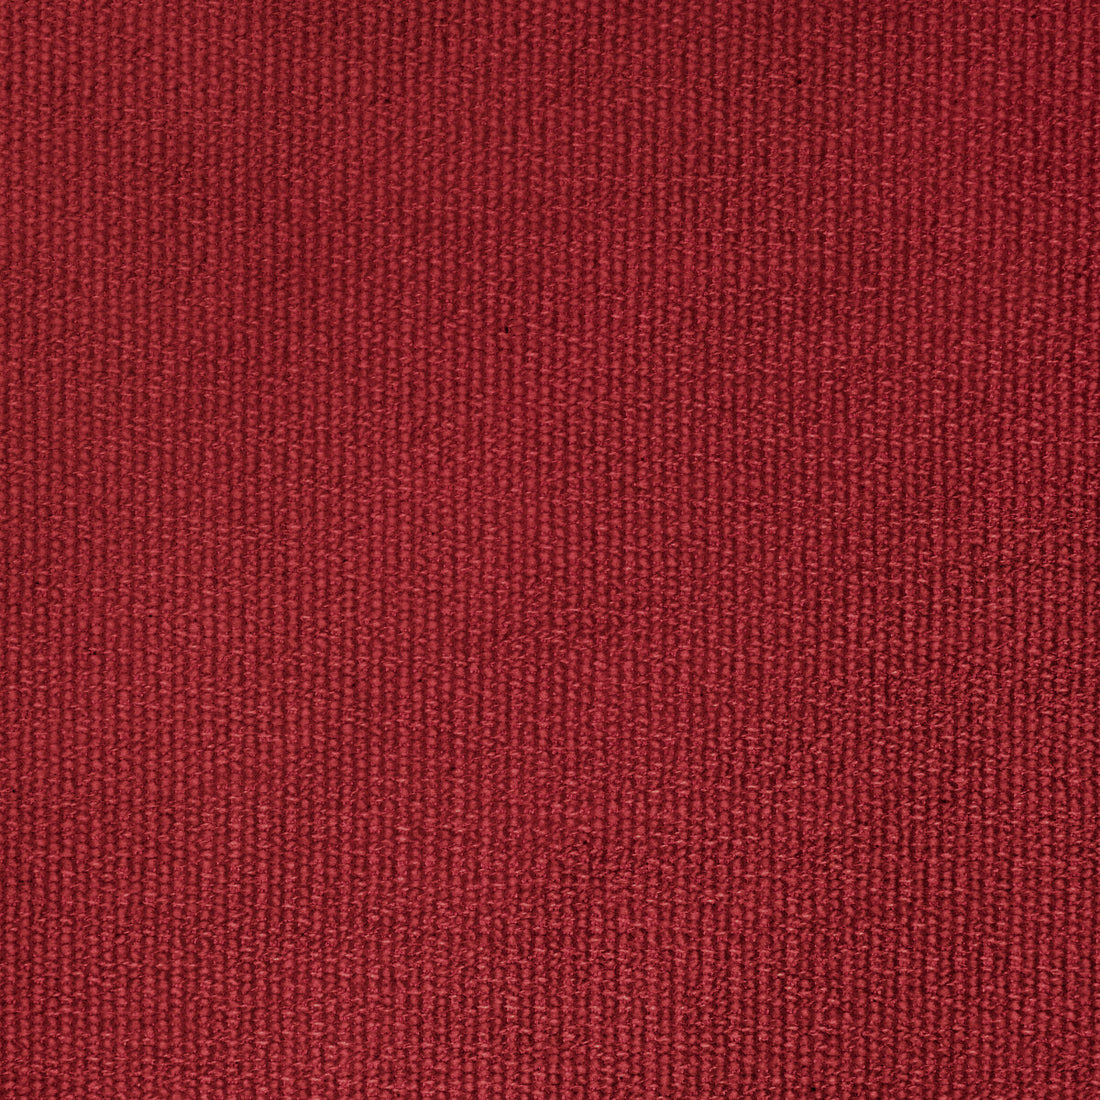 Entoto Weave fabric in red color - pattern 2020109.940.0 - by Lee Jofa in the Breckenridge collection